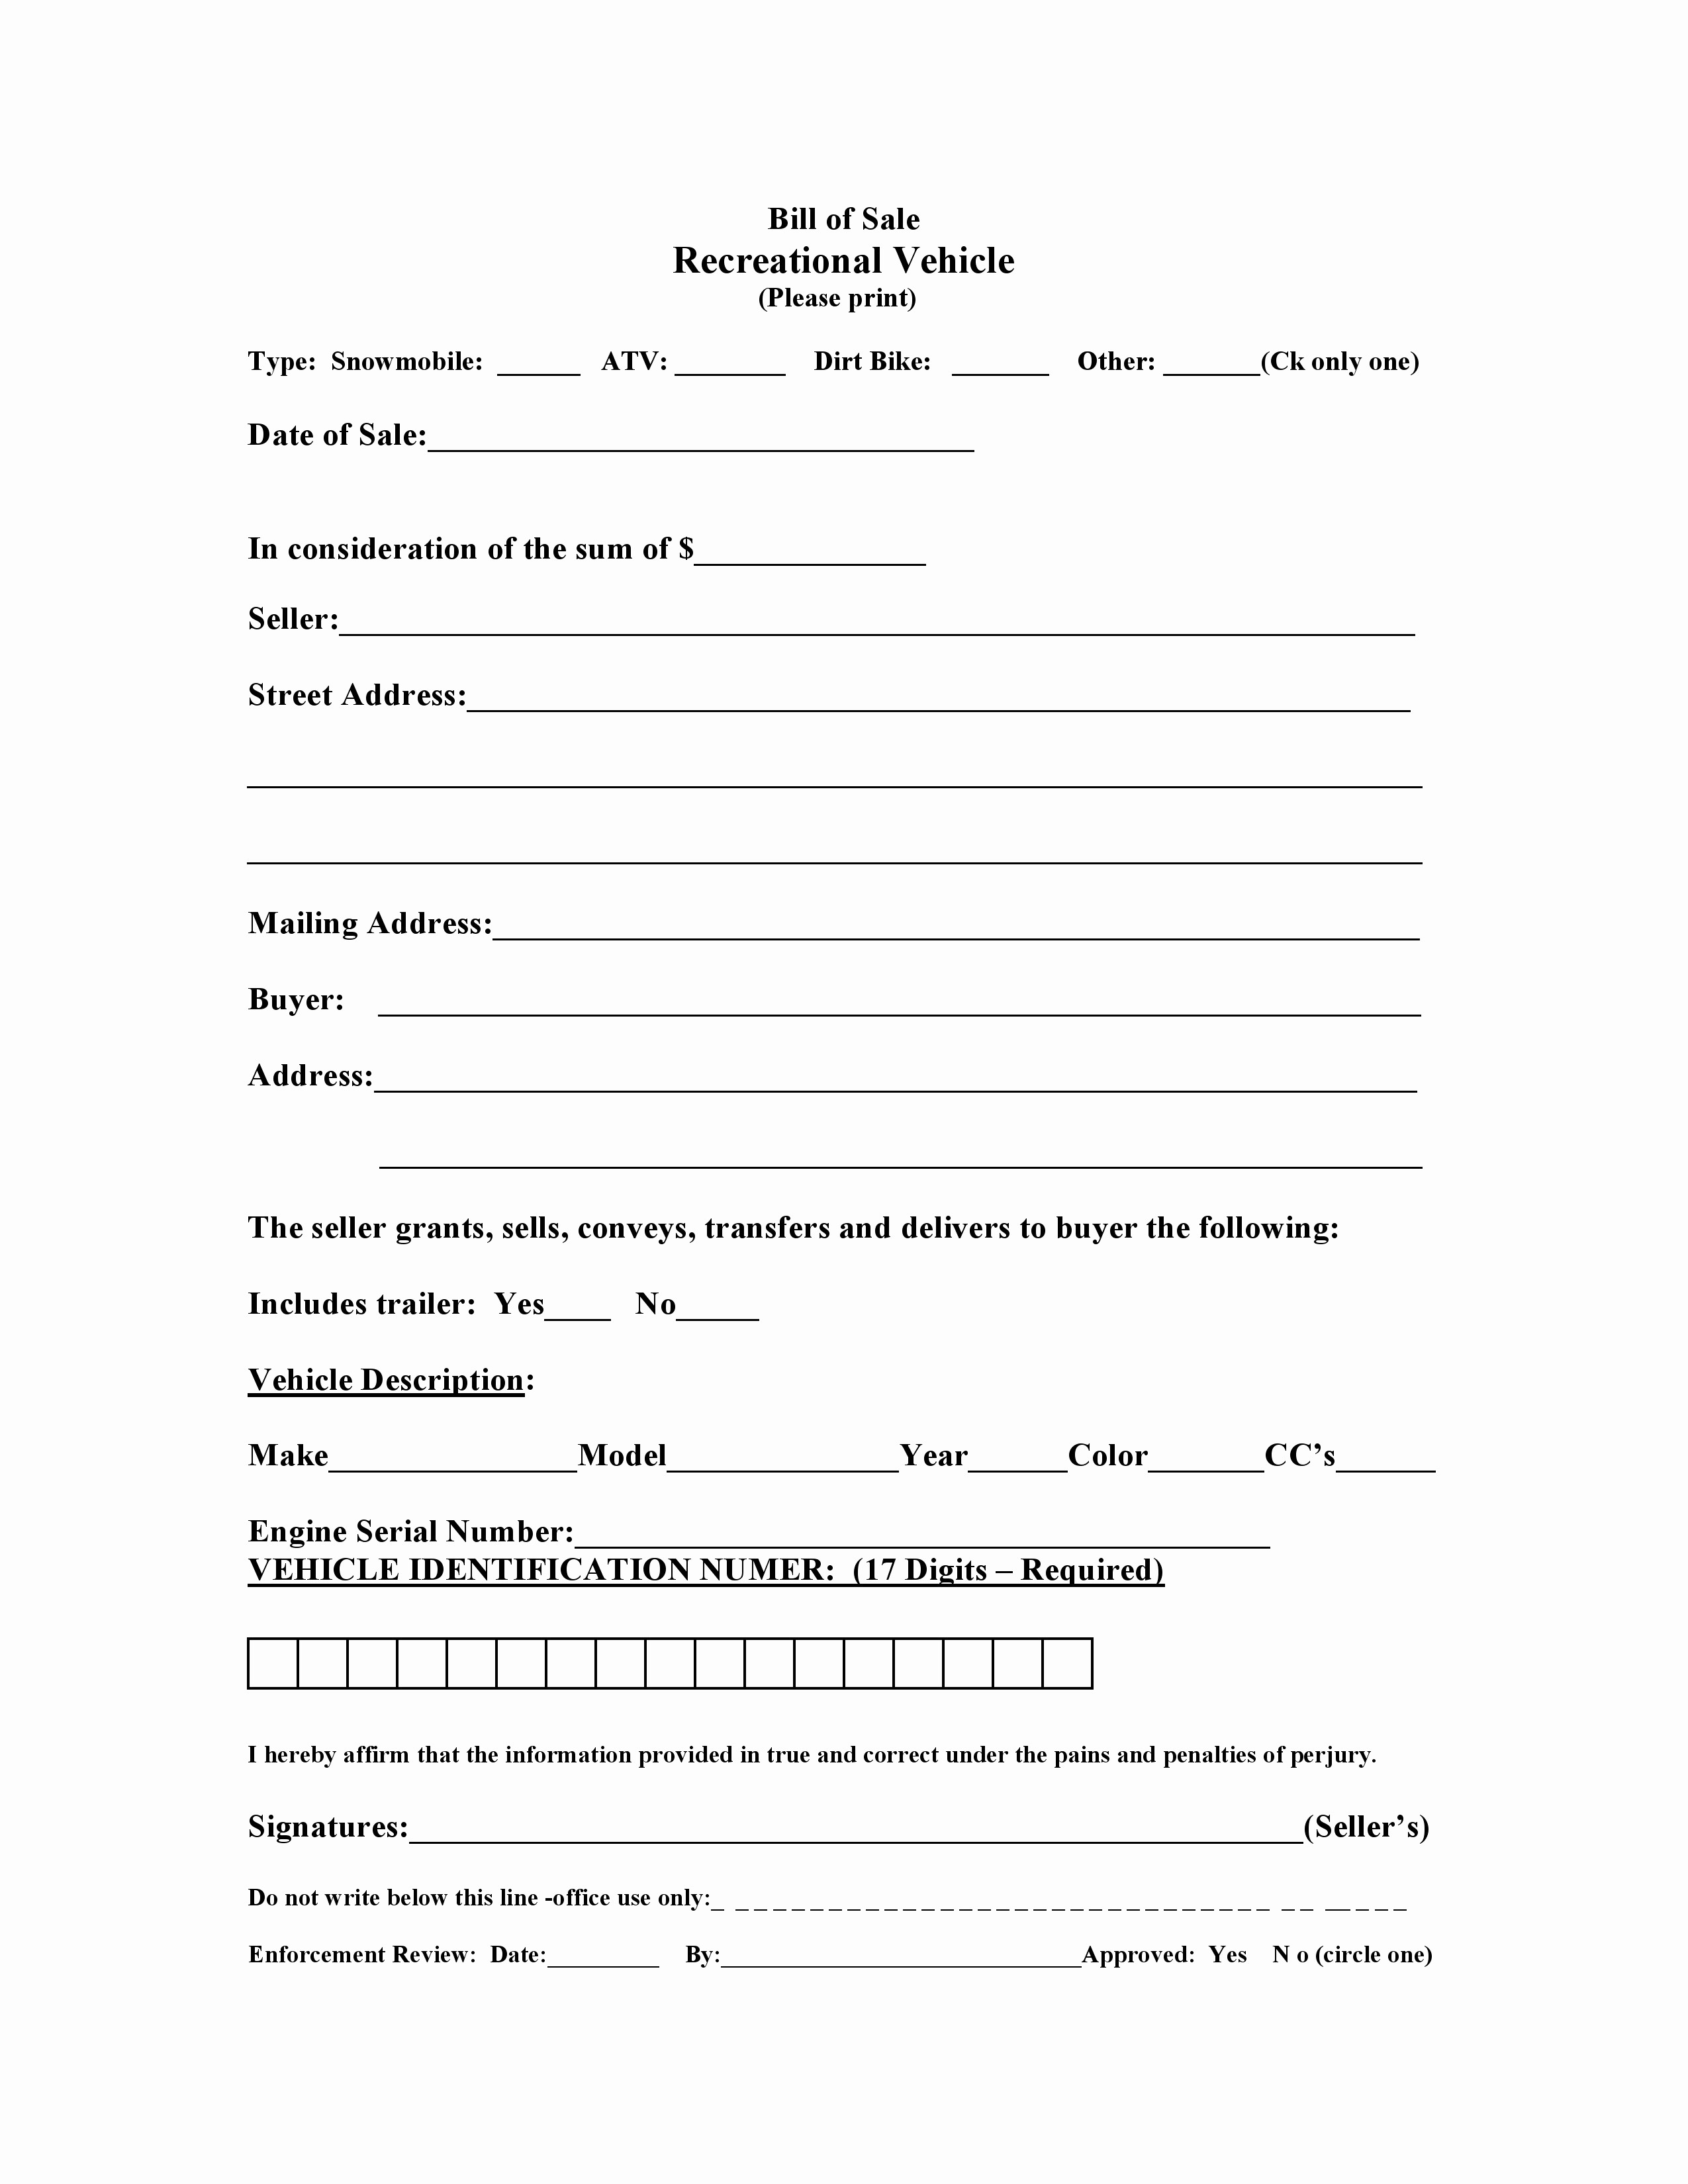 Free forms Bill Of Sale Awesome Free Massachusetts Recreational Vessel Vehicle Bill Of